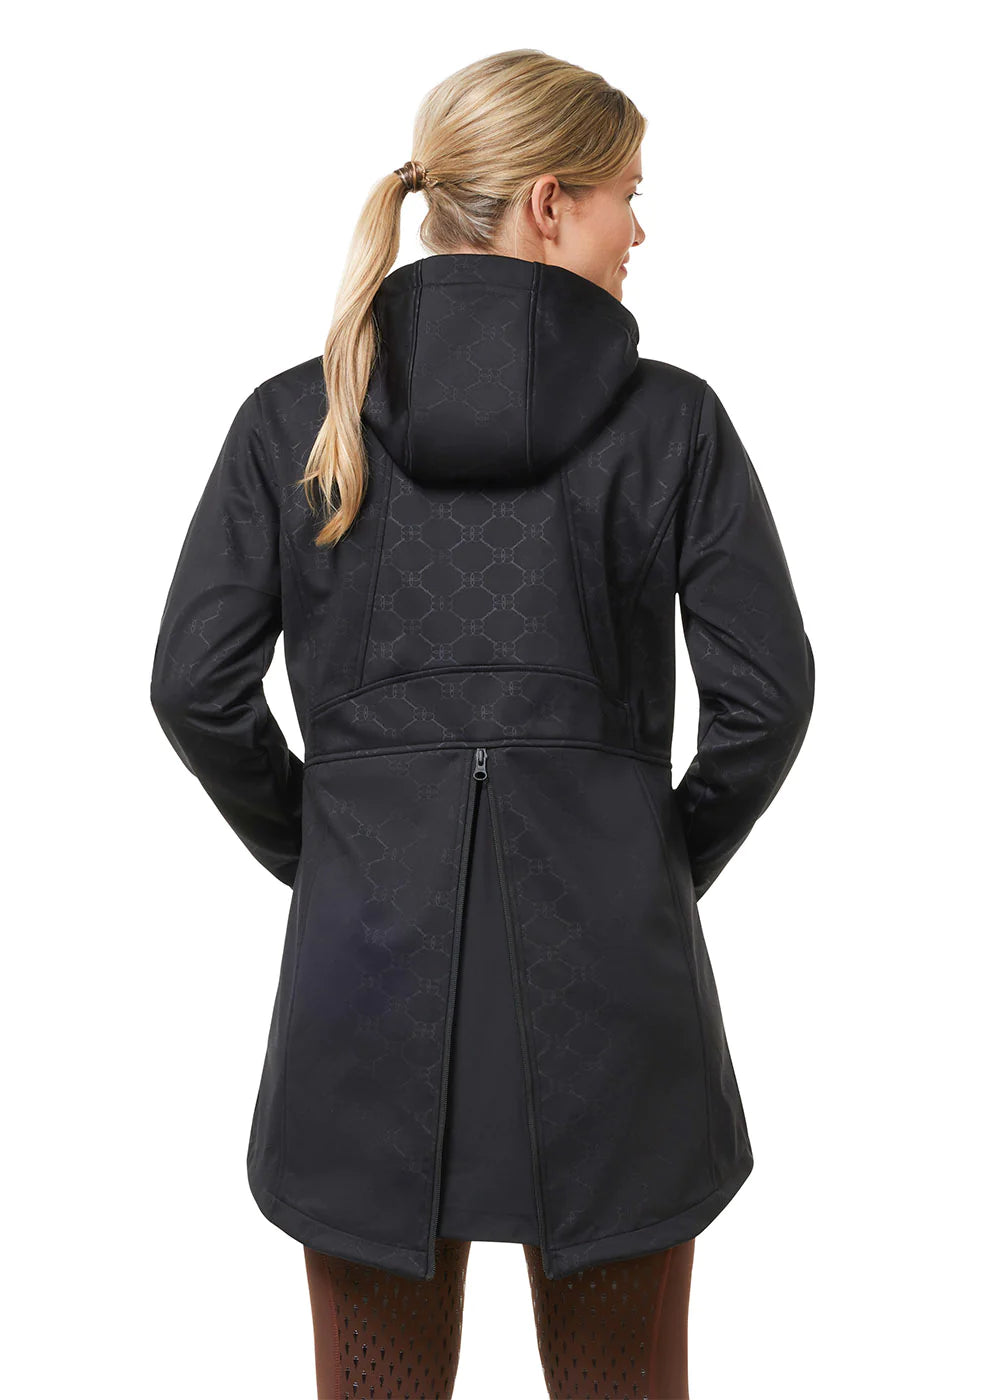 Kerrits Lucky Bits Softshell Riding Jacket - Equine Exchange Tack Shop